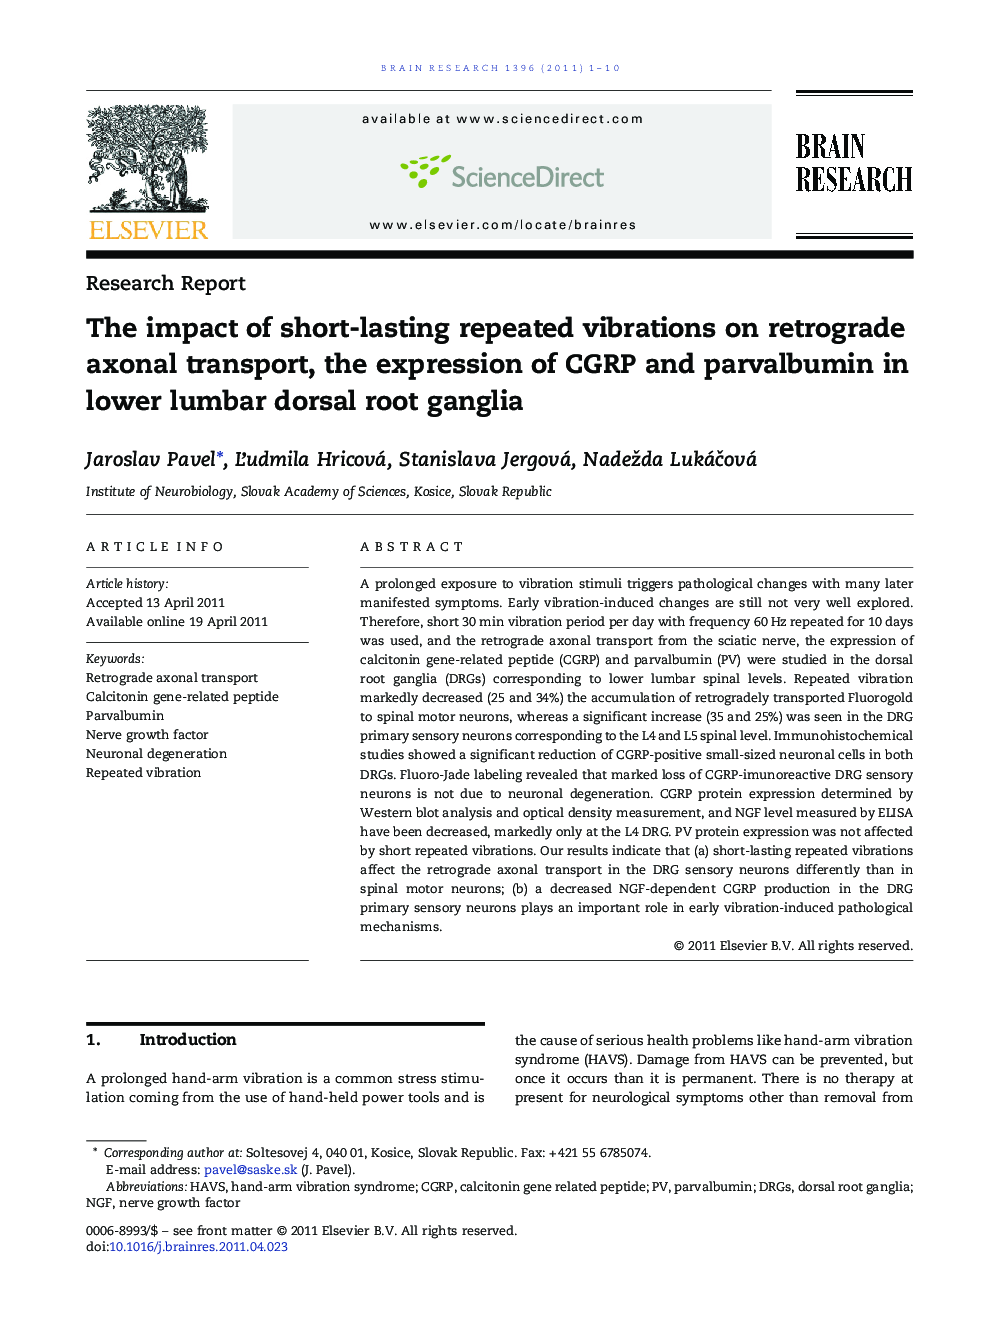 The impact of short-lasting repeated vibrations on retrograde axonal transport, the expression of CGRP and parvalbumin in lower lumbar dorsal root ganglia